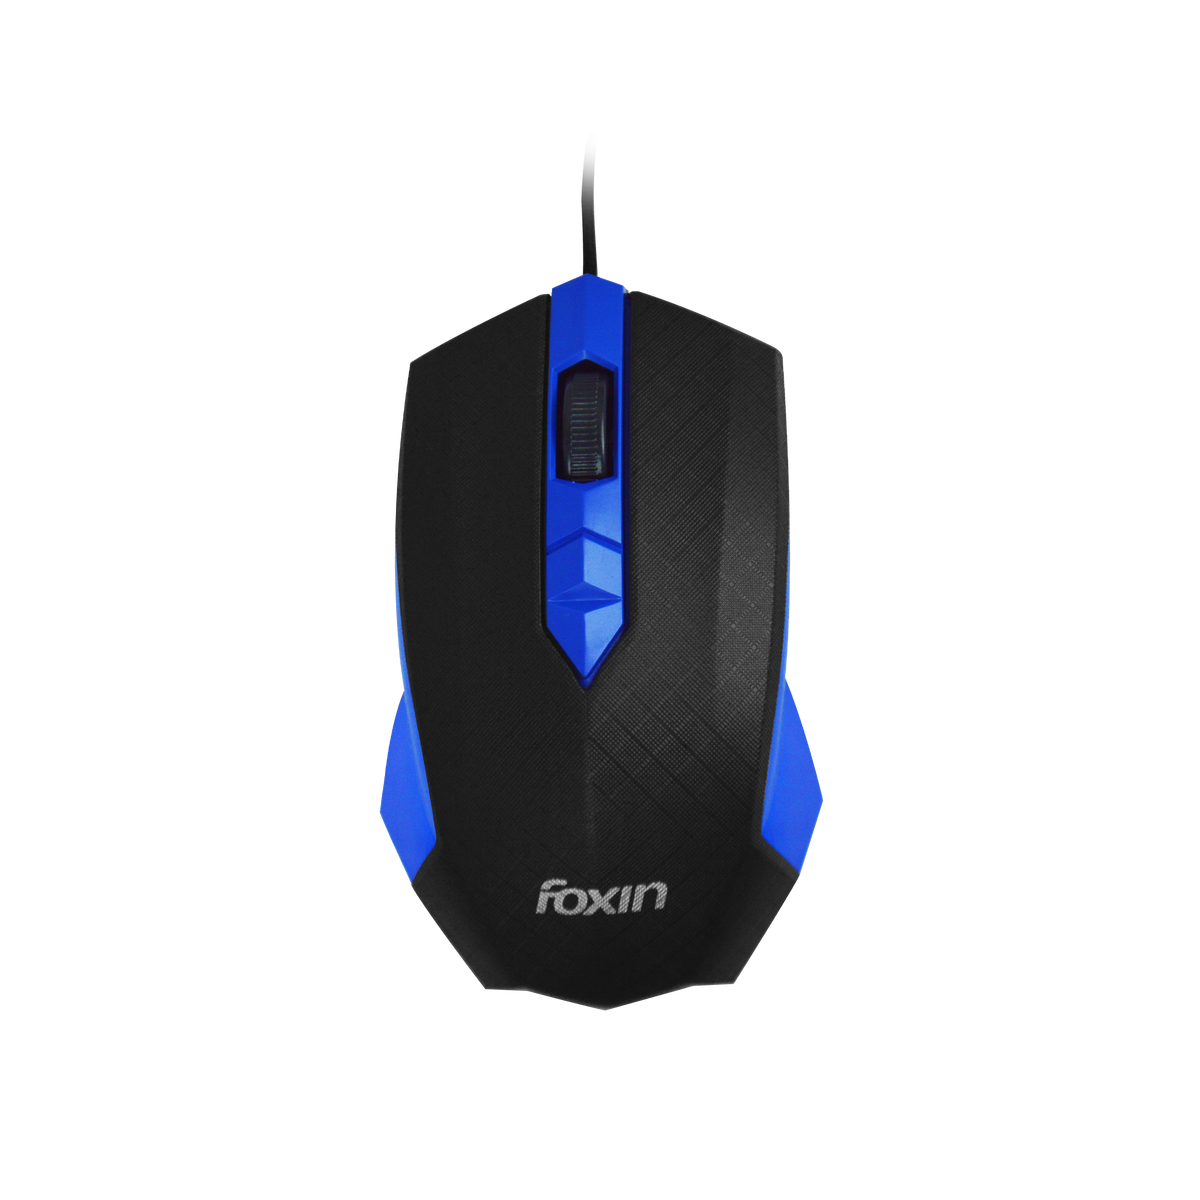 Foxin Smart Wired Mouse (FOXMOU0113)